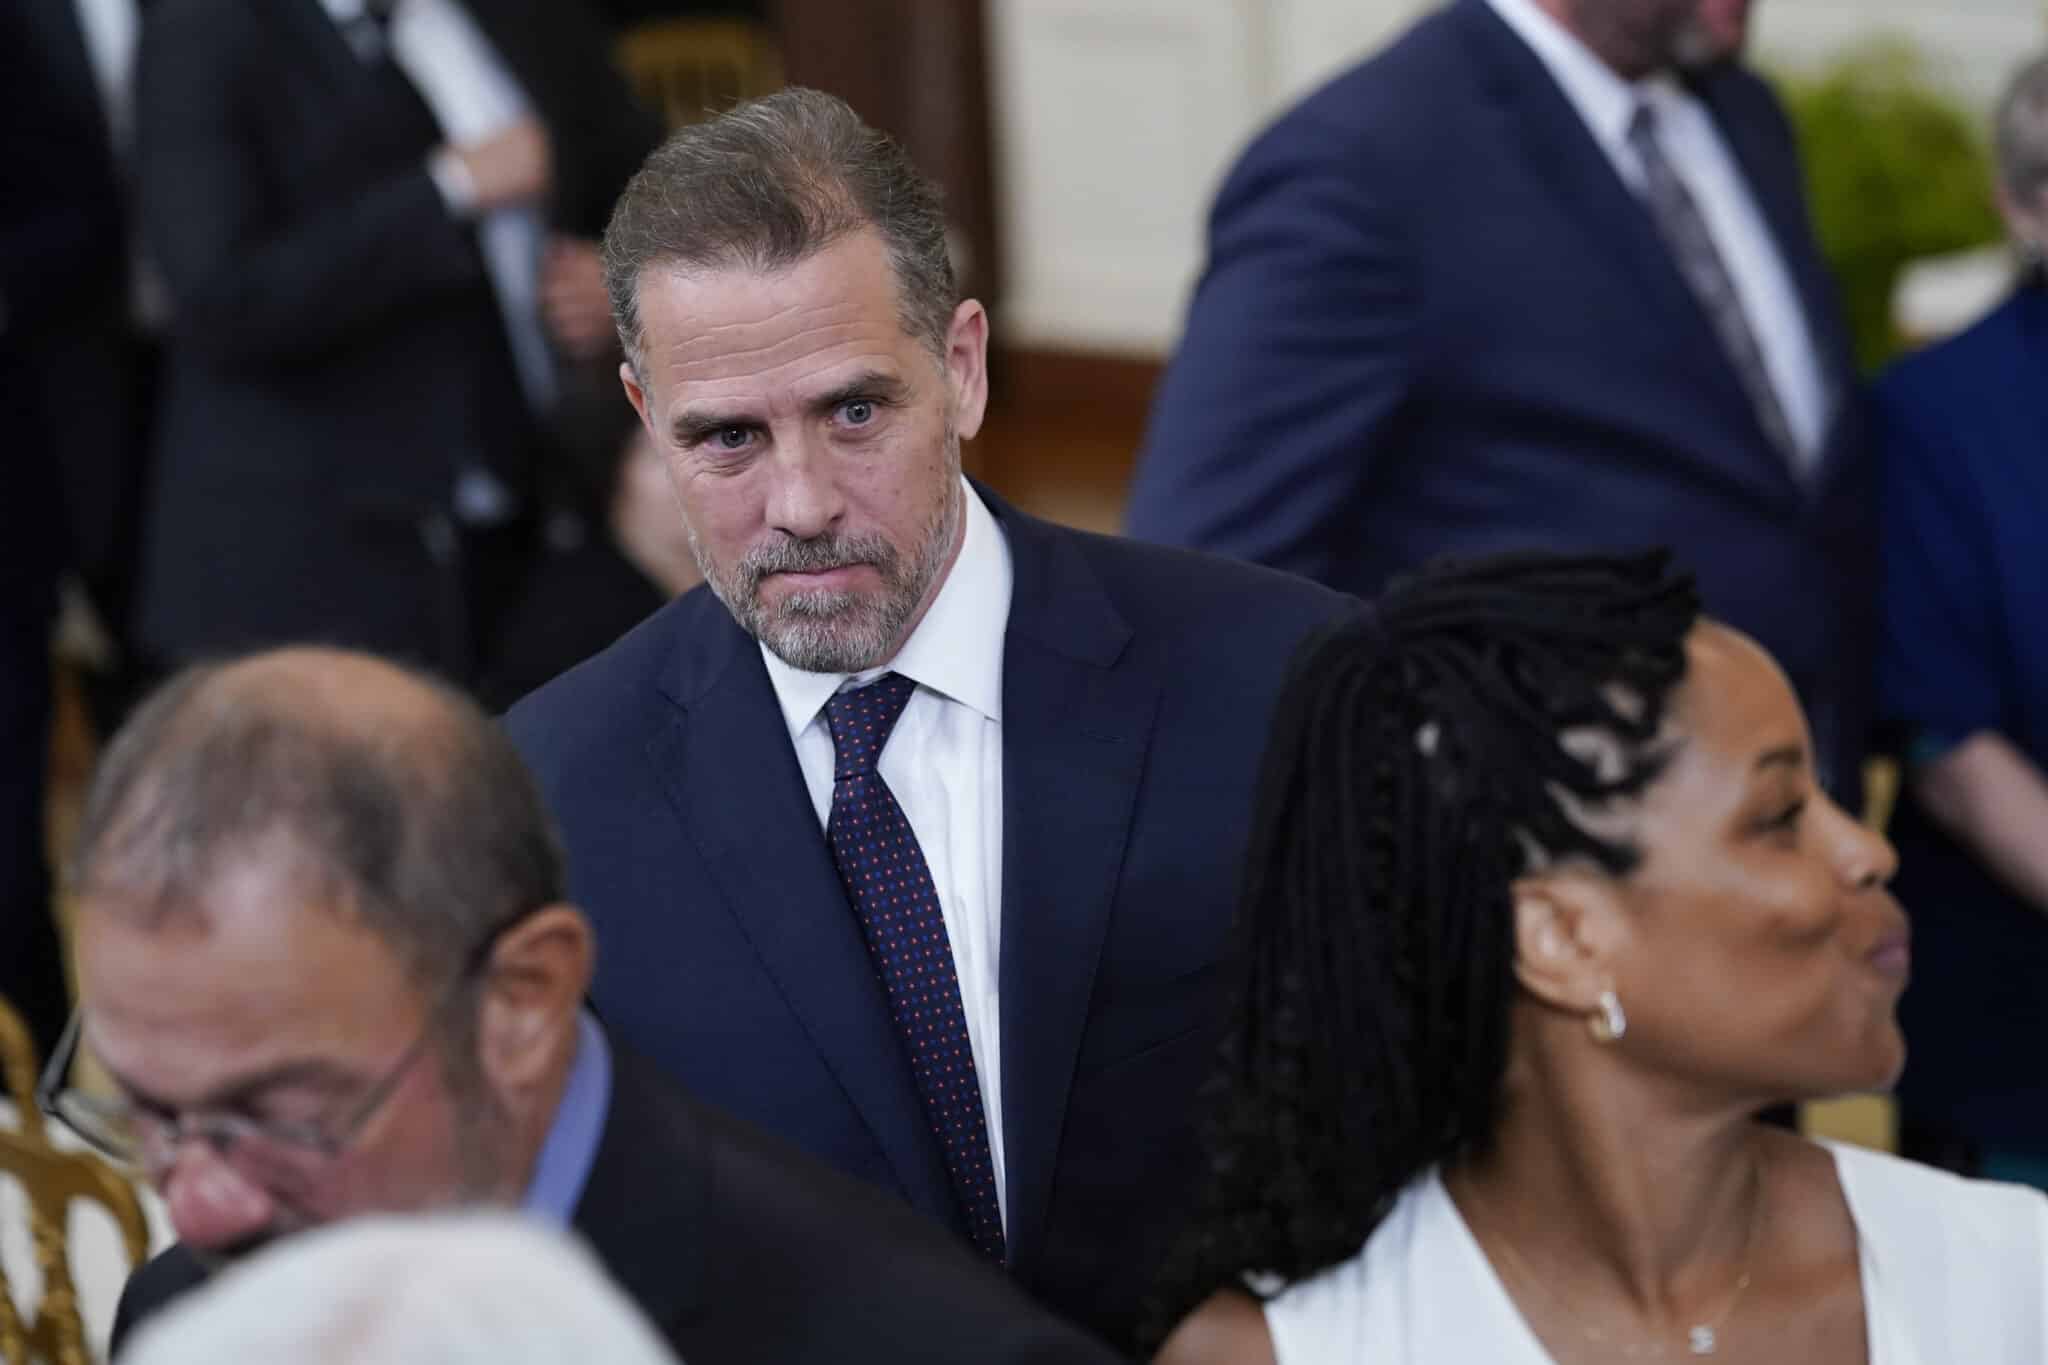 Hunter Biden leaves after President Joe Biden awarded the Presidential Medal of Freedom to 17 people during a ceremony in the East Room of the White House in Washington, Thursday, July 7, 2022. (AP Photo/Susan Walsh)